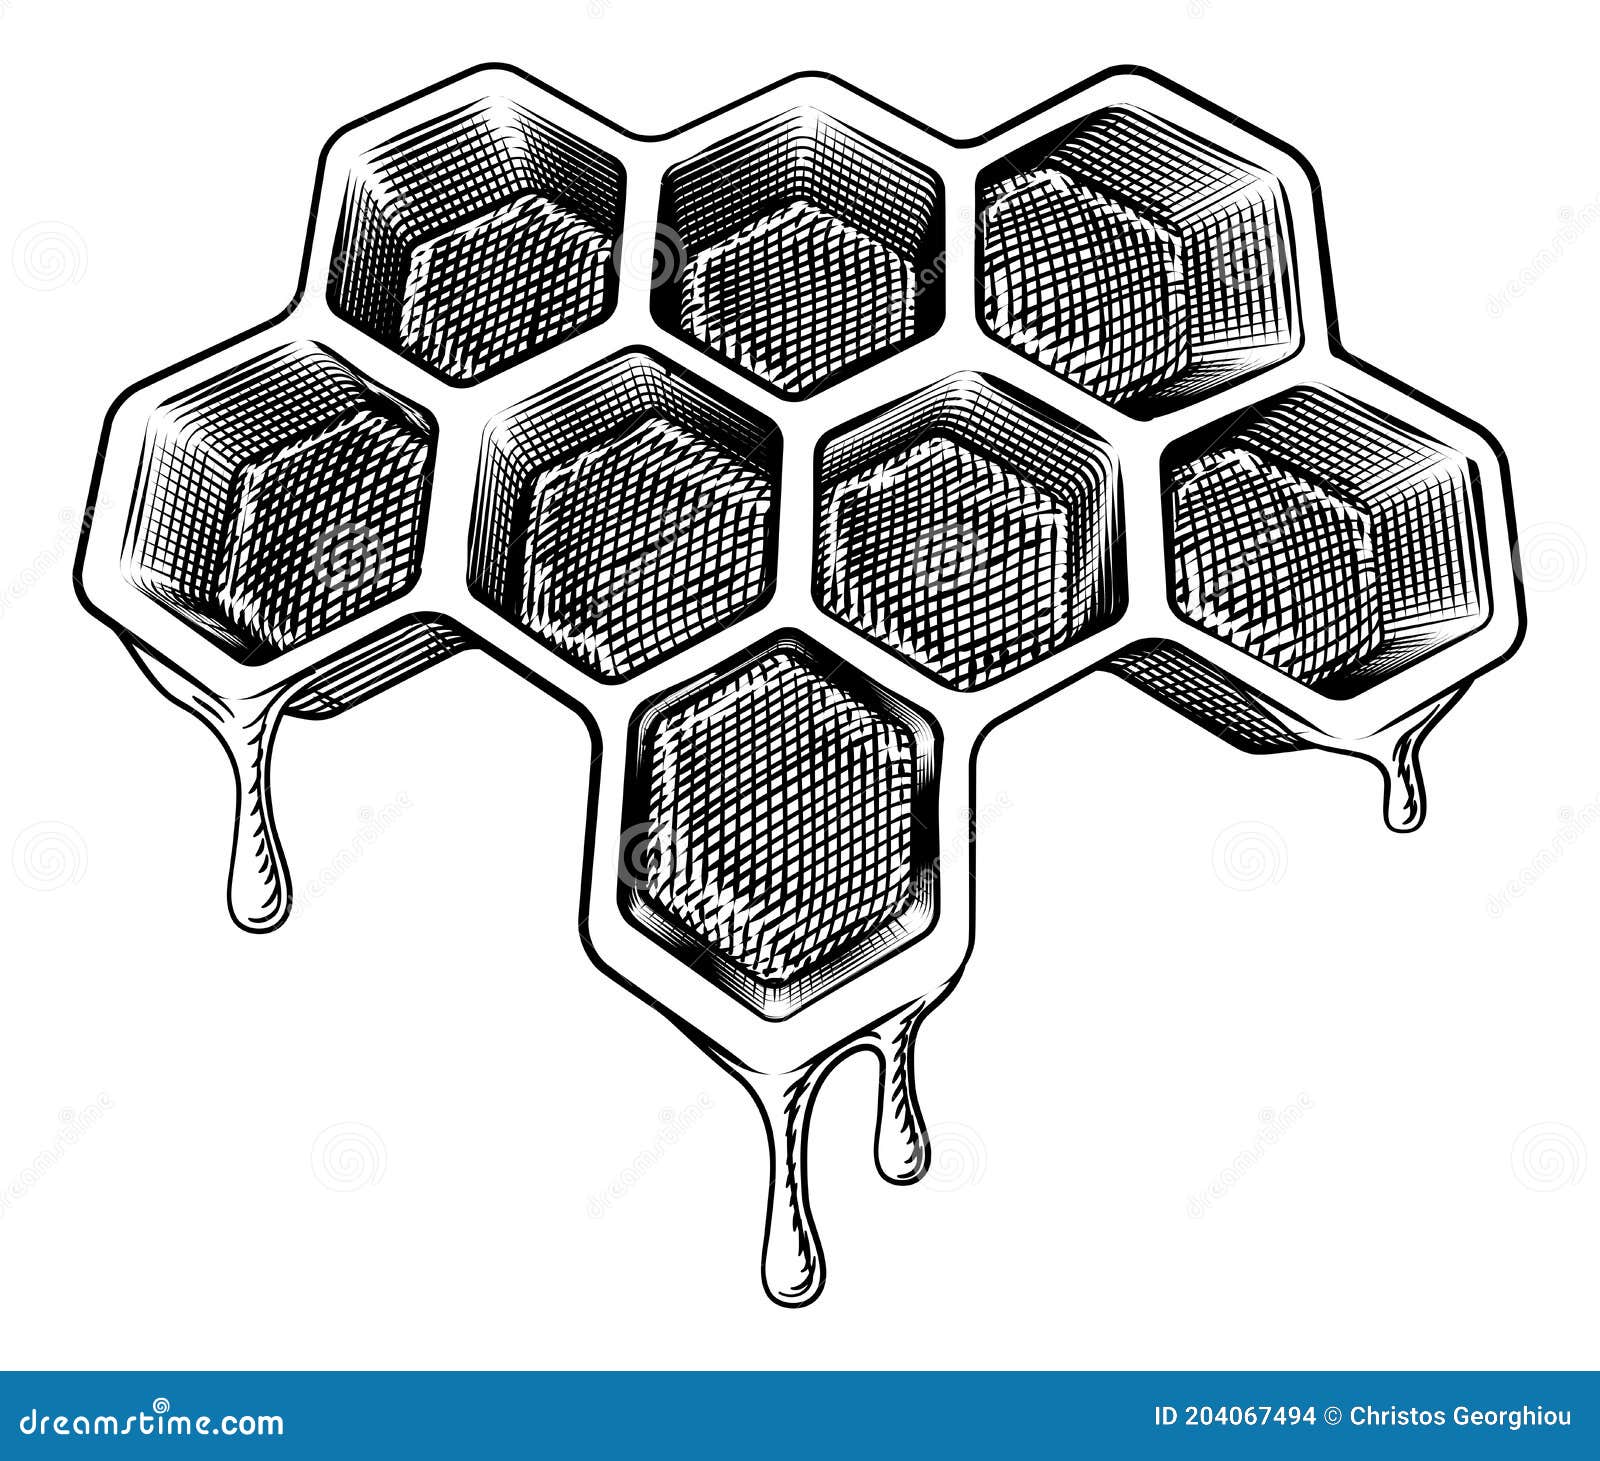 Bee Honeycomb Dripping With Honey Vintage Style Vector Illustration